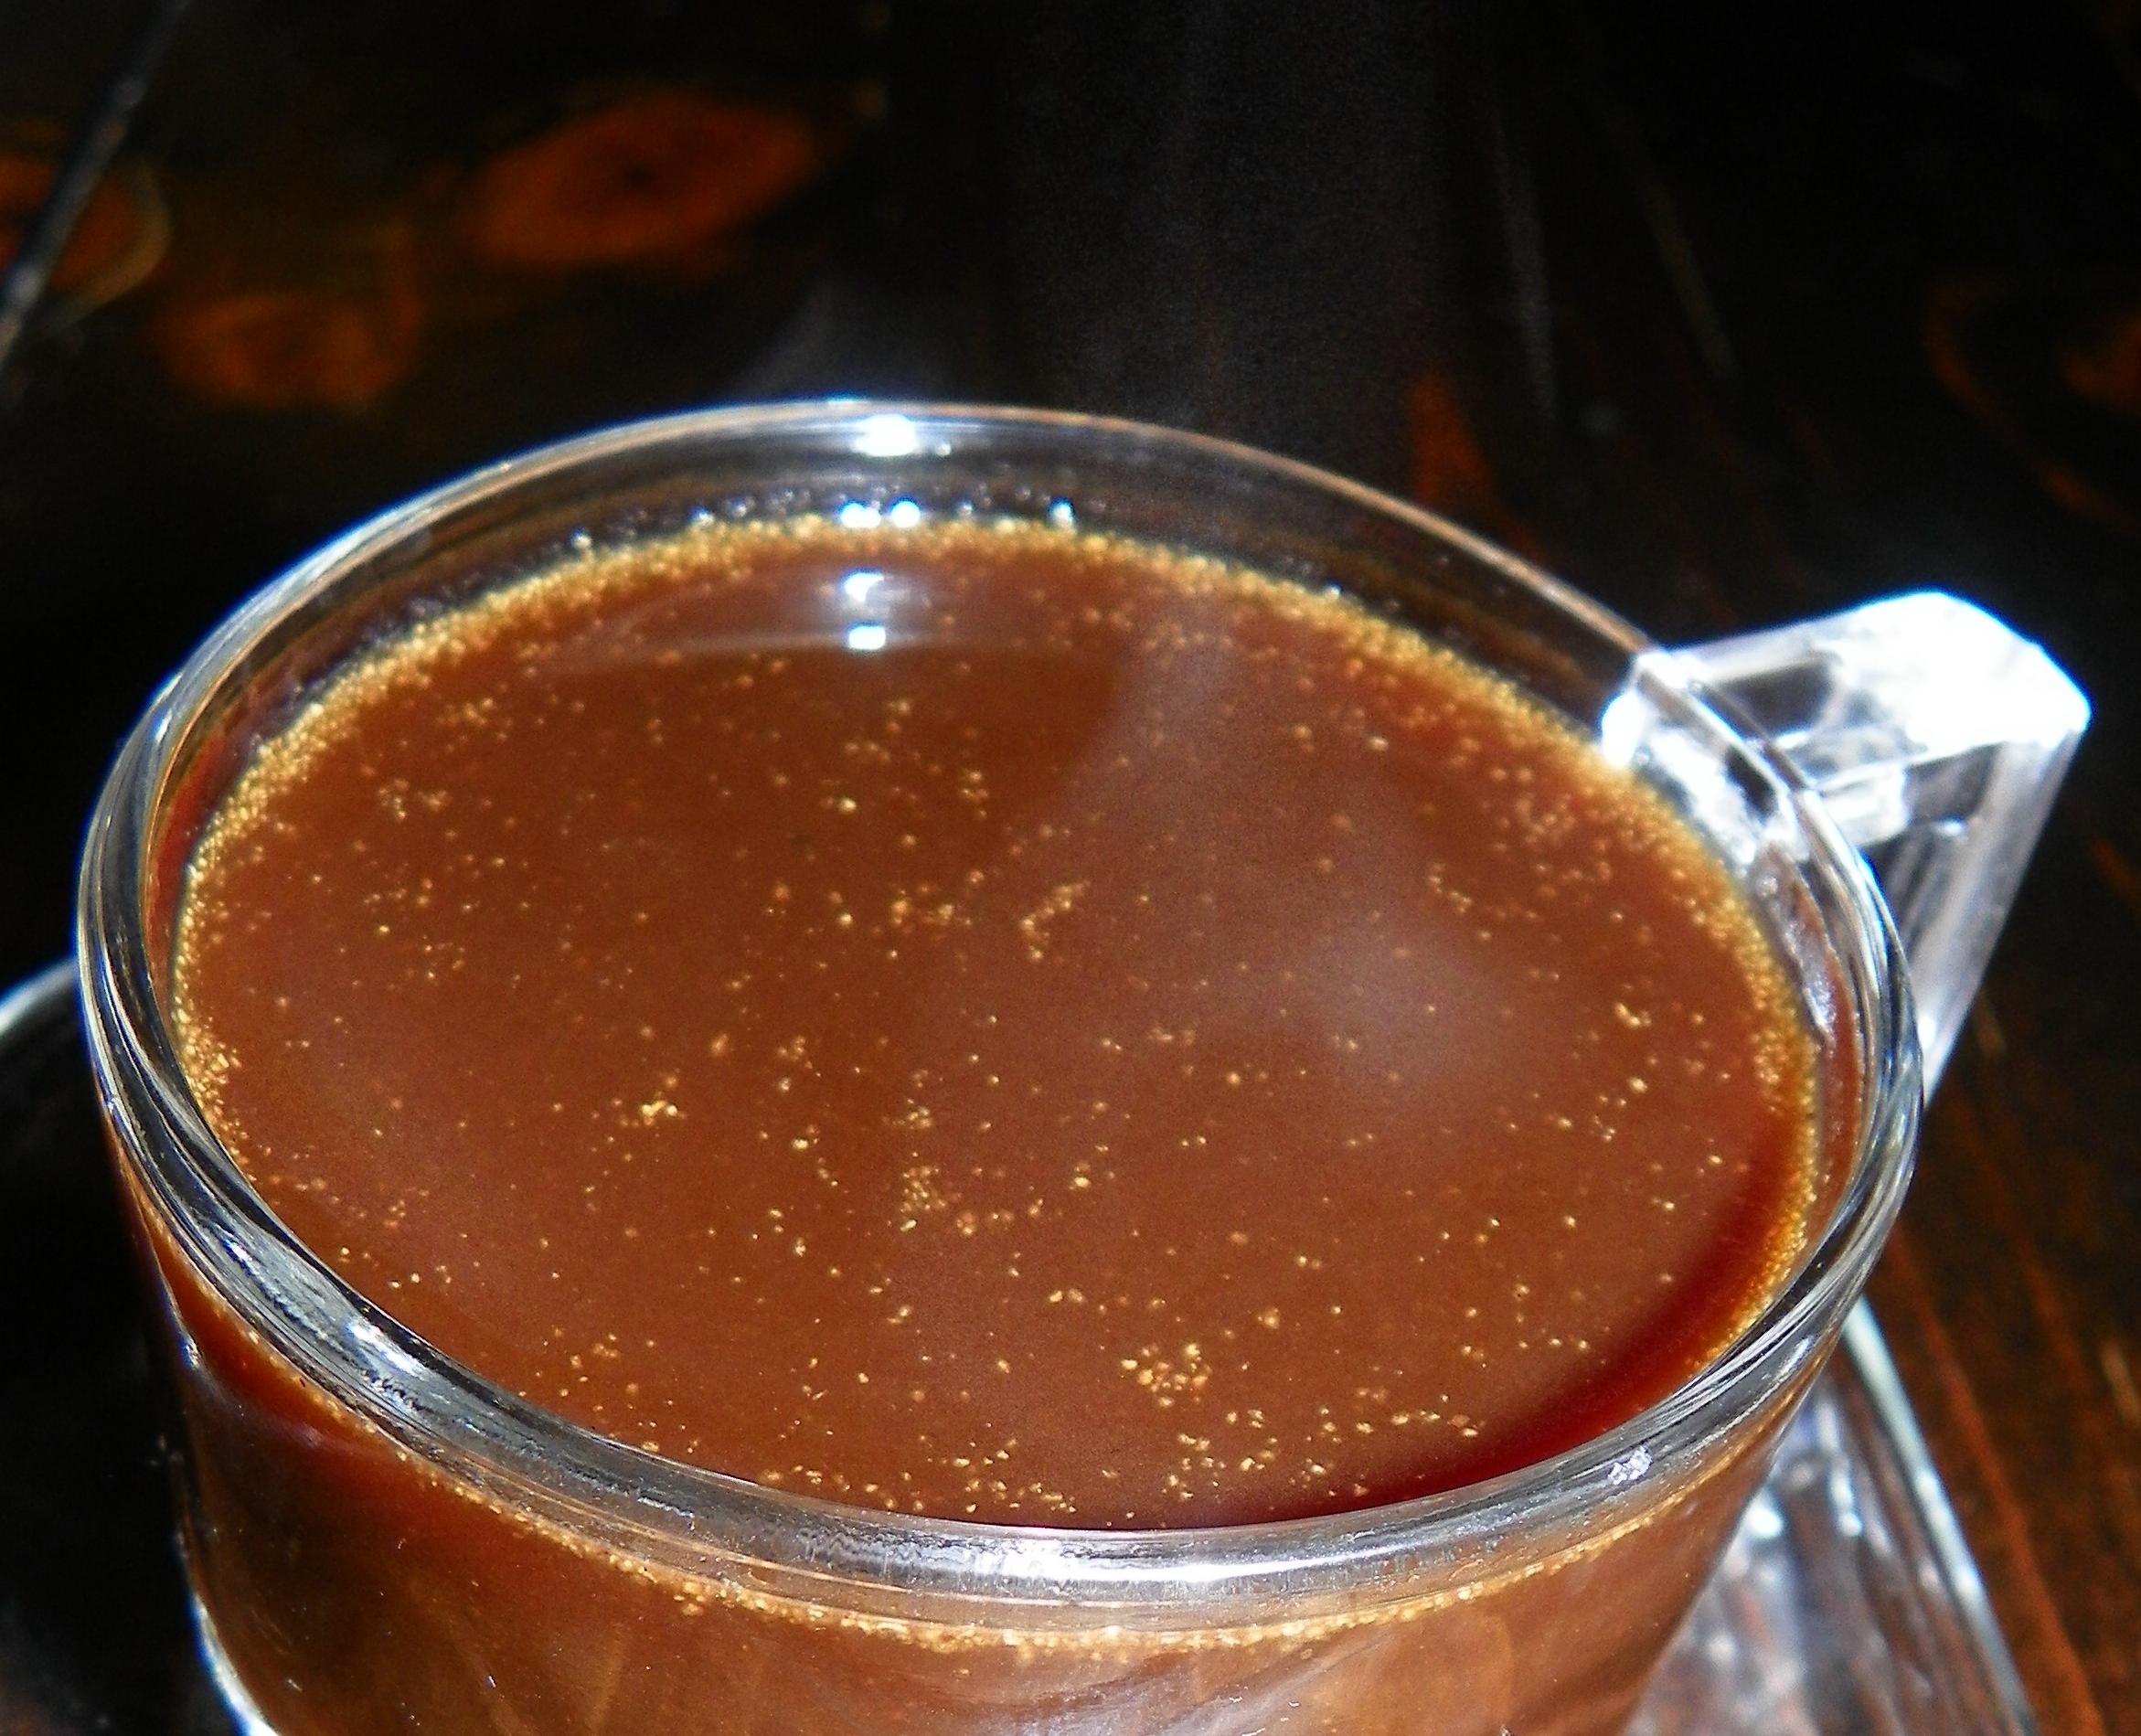  Warm up with a spicy and aromatic Yemeni Qishr coffee